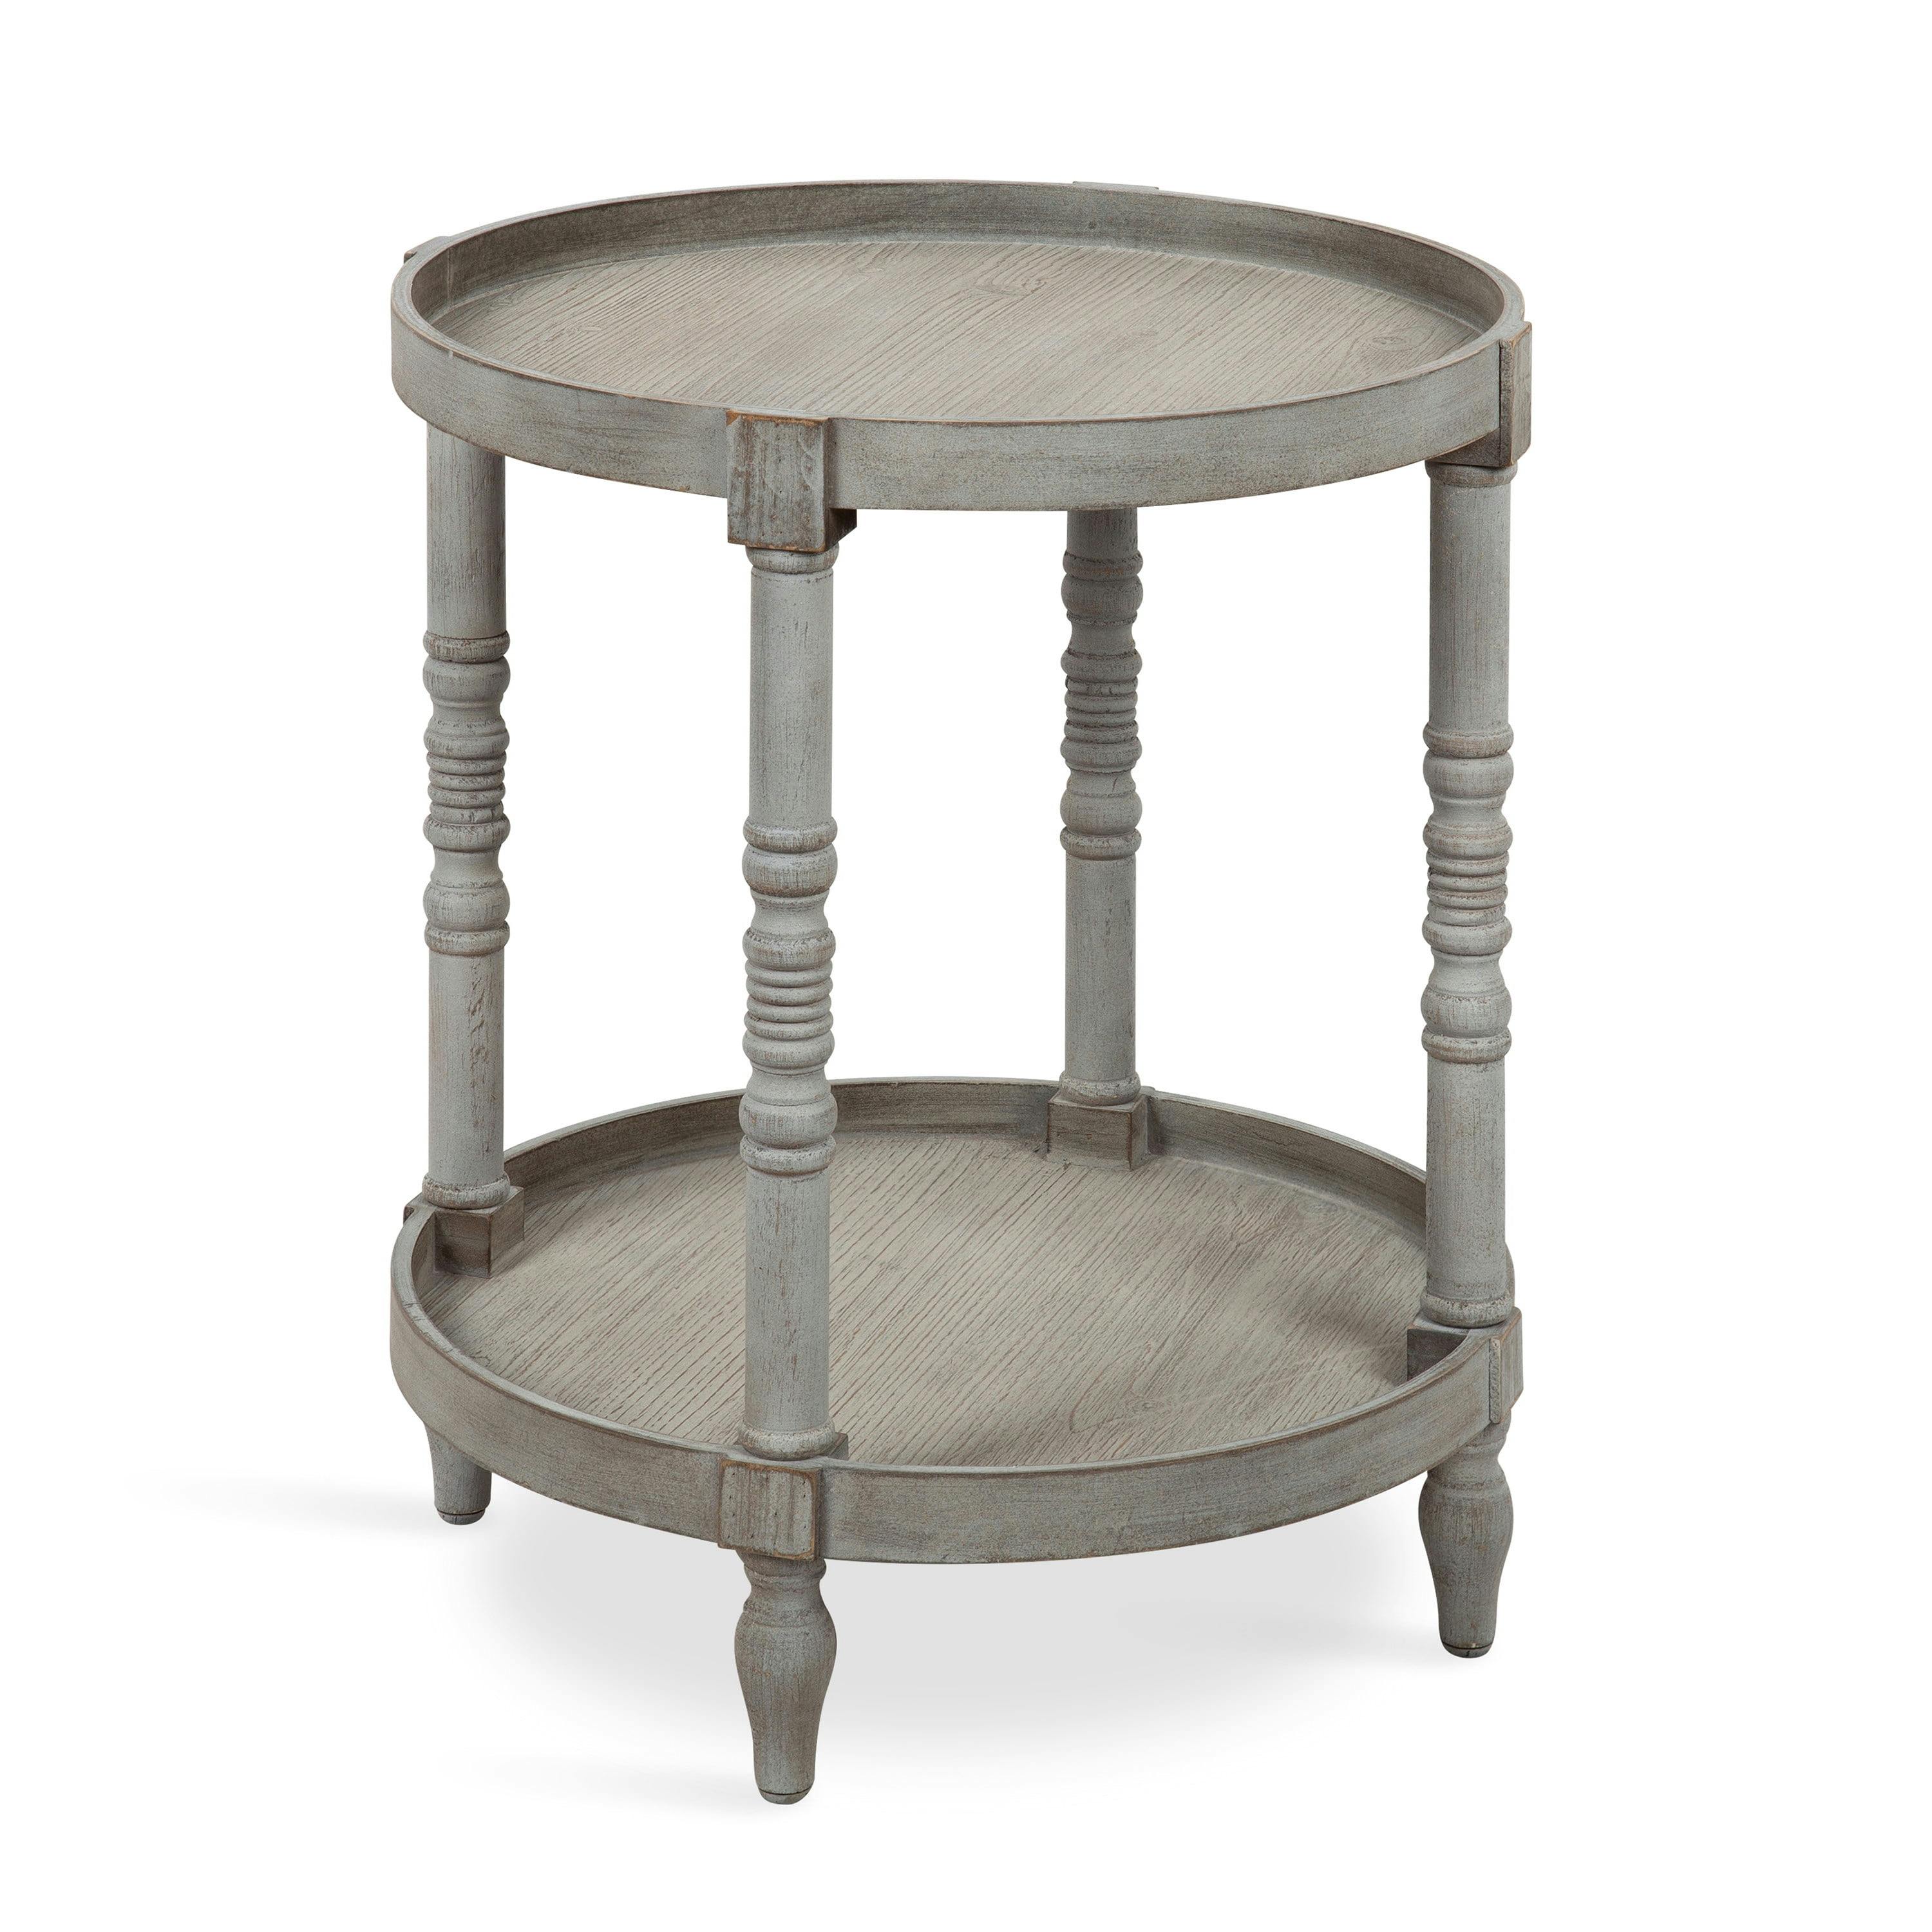 Lucinda End Table